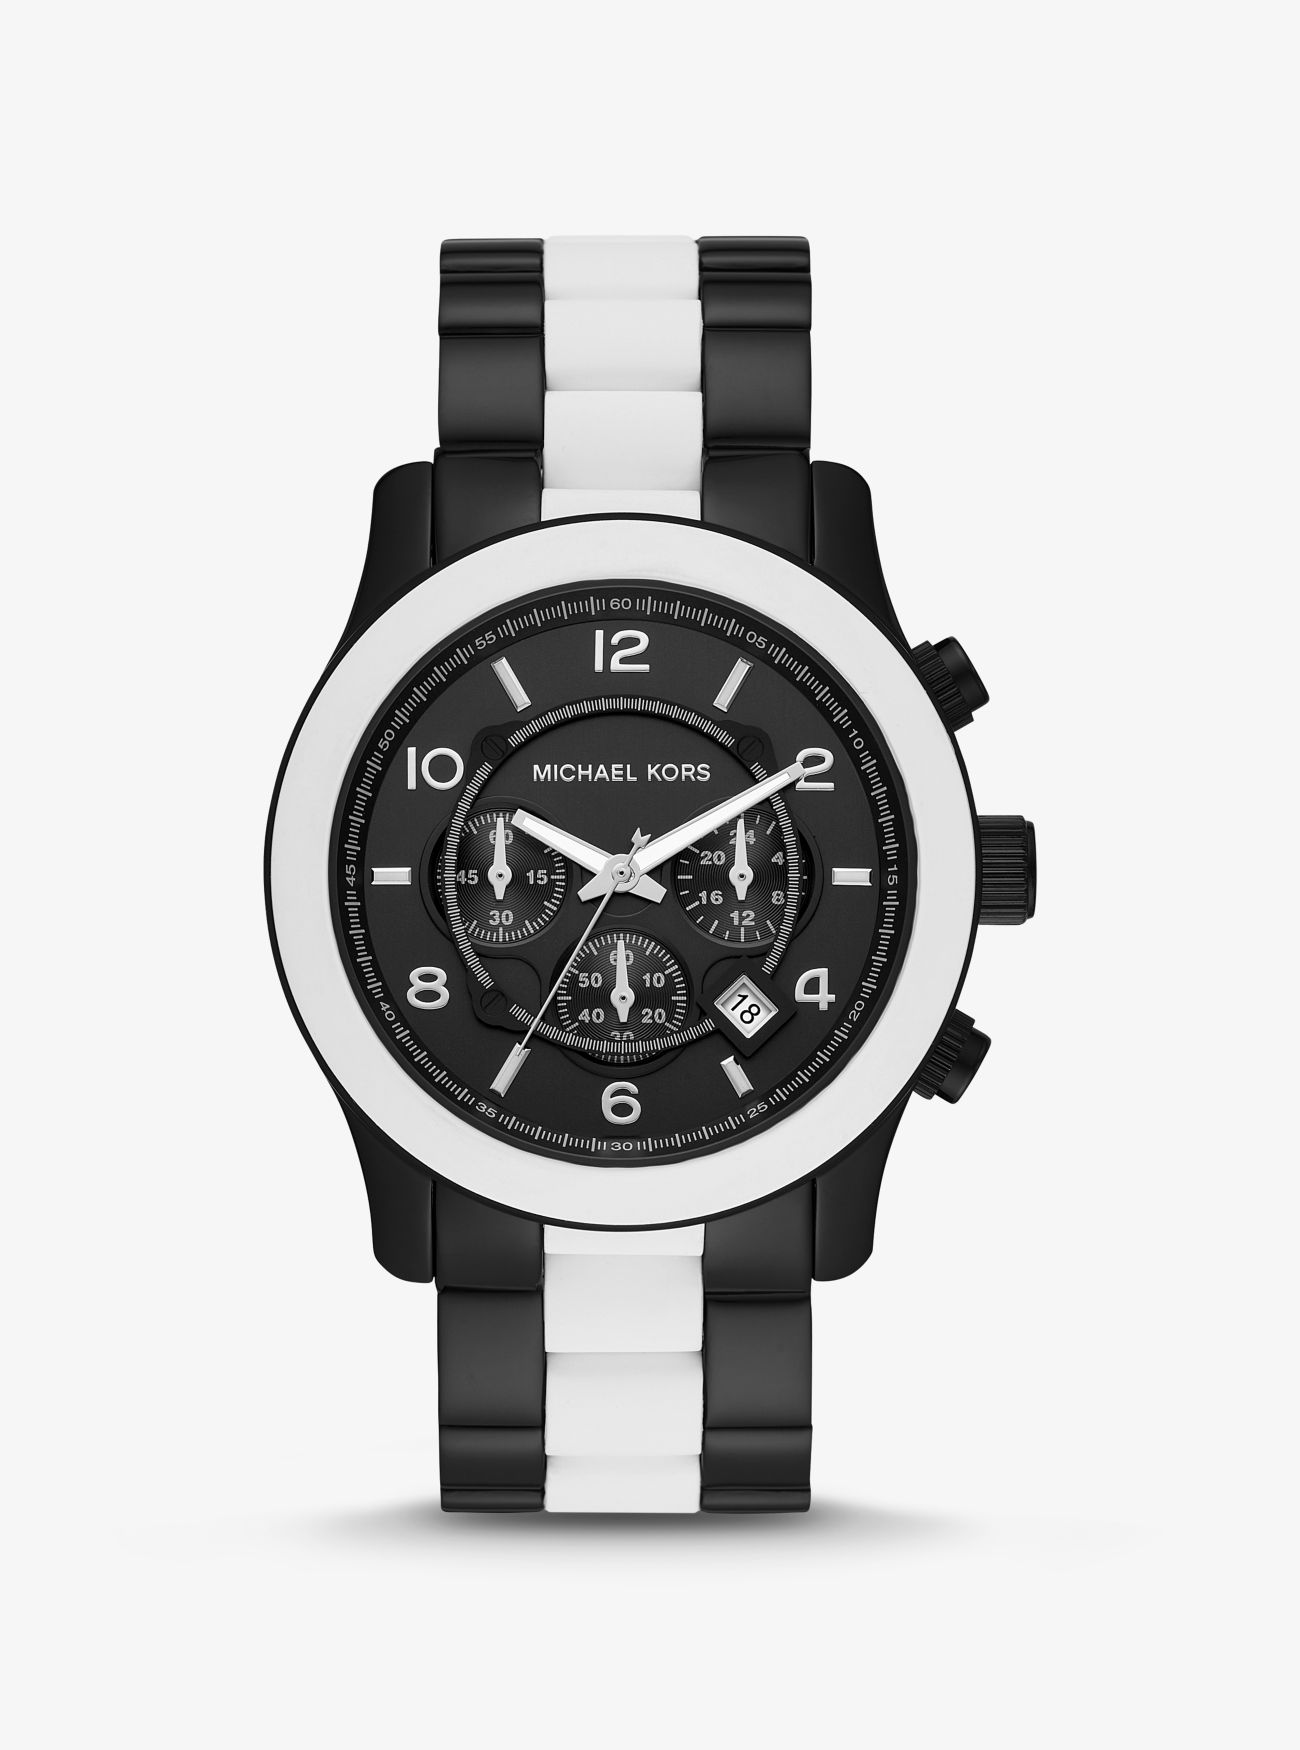 MICHAEL KORS Oversized Runway Black-Tone and Silicone Watch Style MK8757